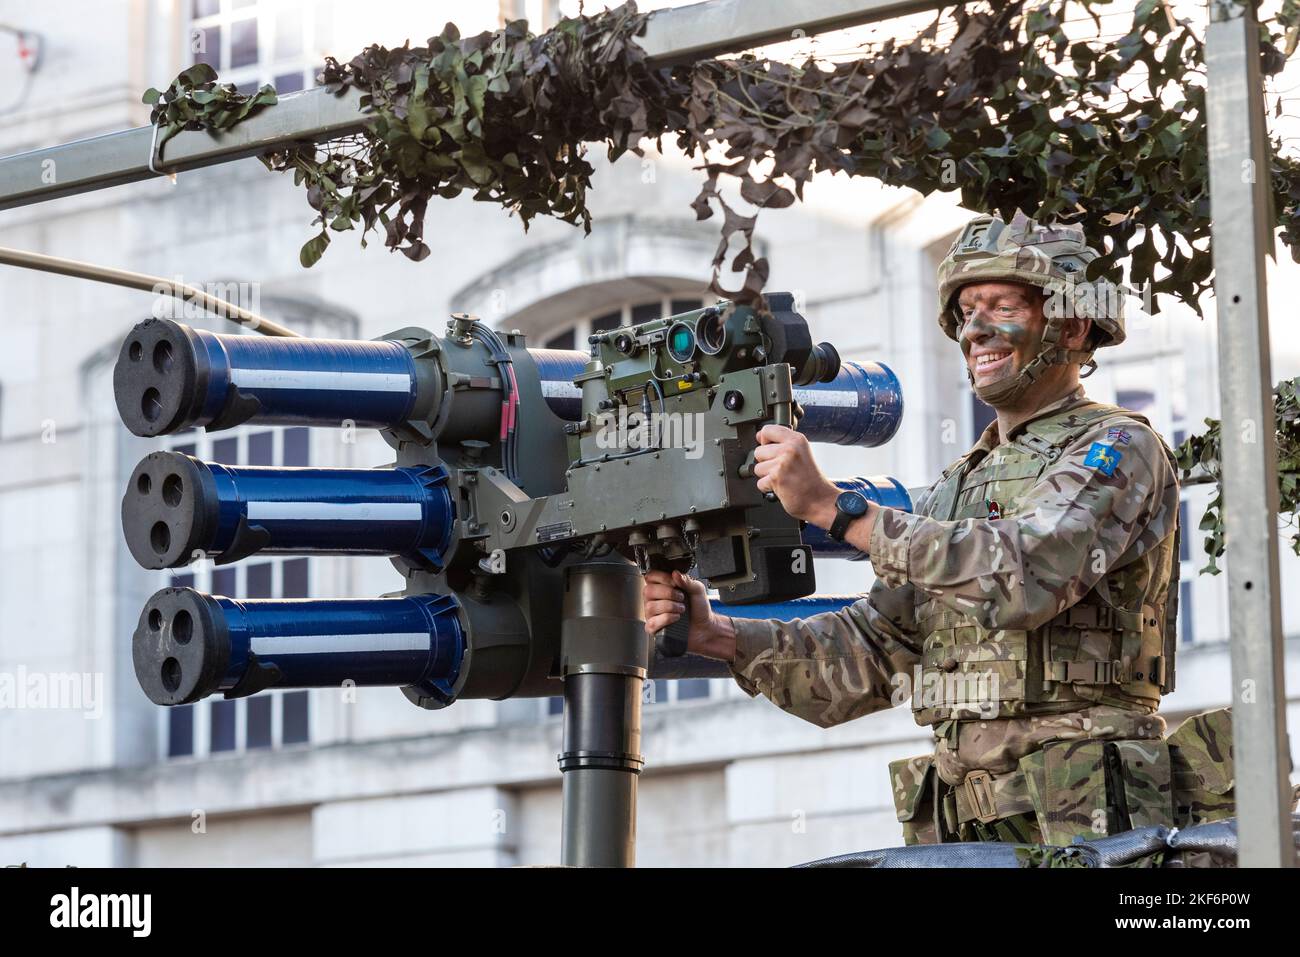 106 (Yeomanry) Regiment Royal Artillery at the Lord Mayor's Show parade in the City of London, UK. Starstreak HVM (High Velocity Missile) system Stock Photo